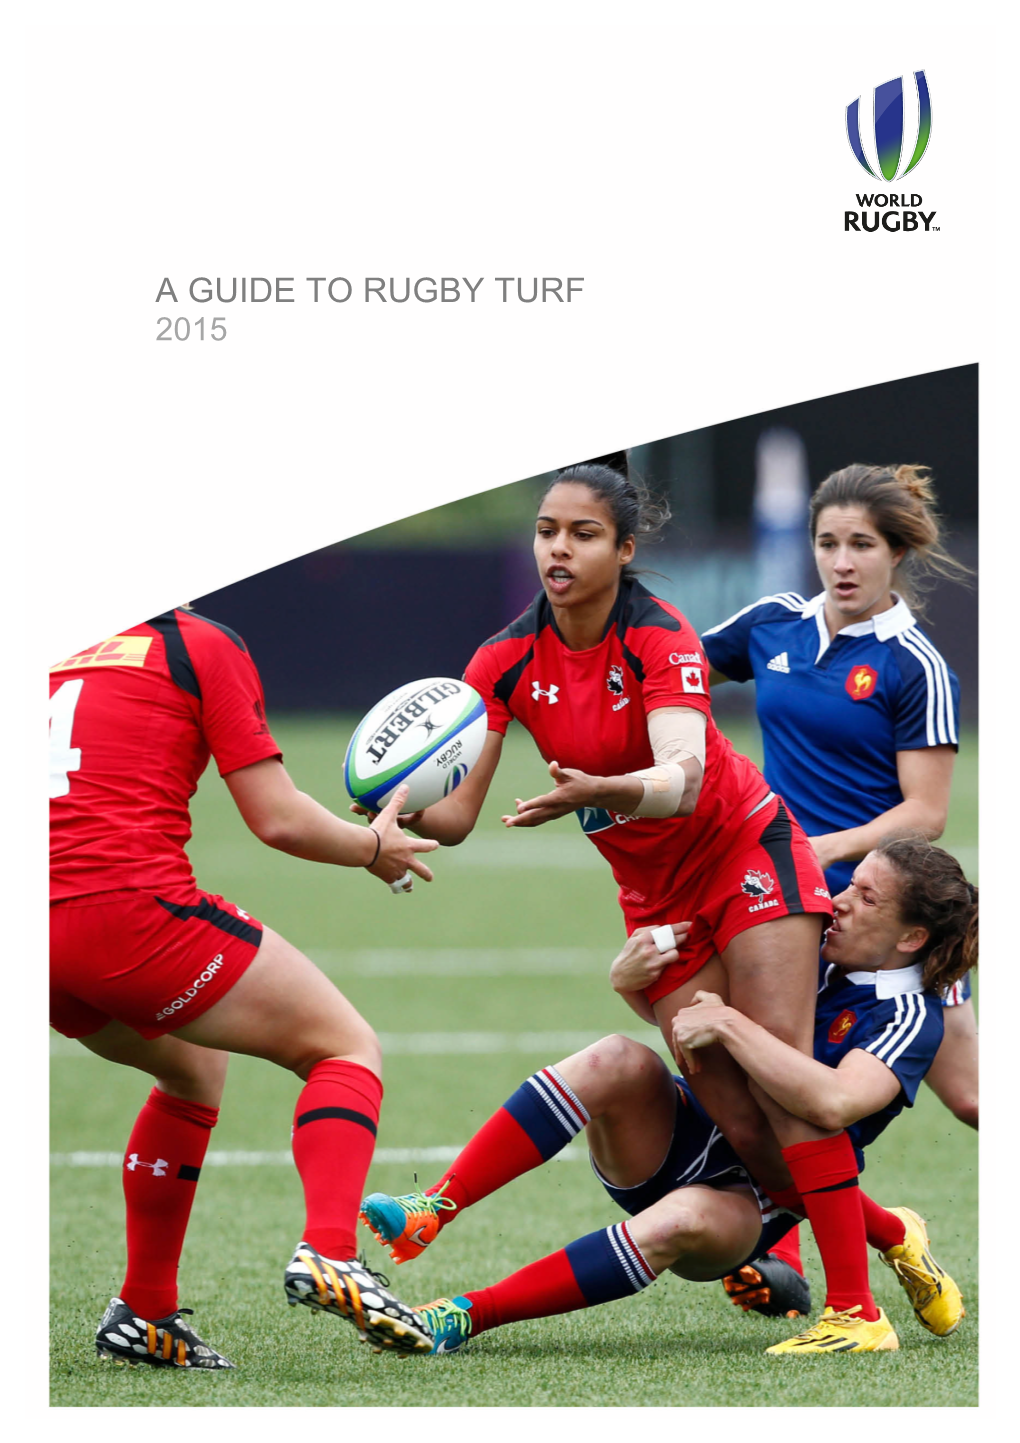 A Guide to Rugby Turf 2015